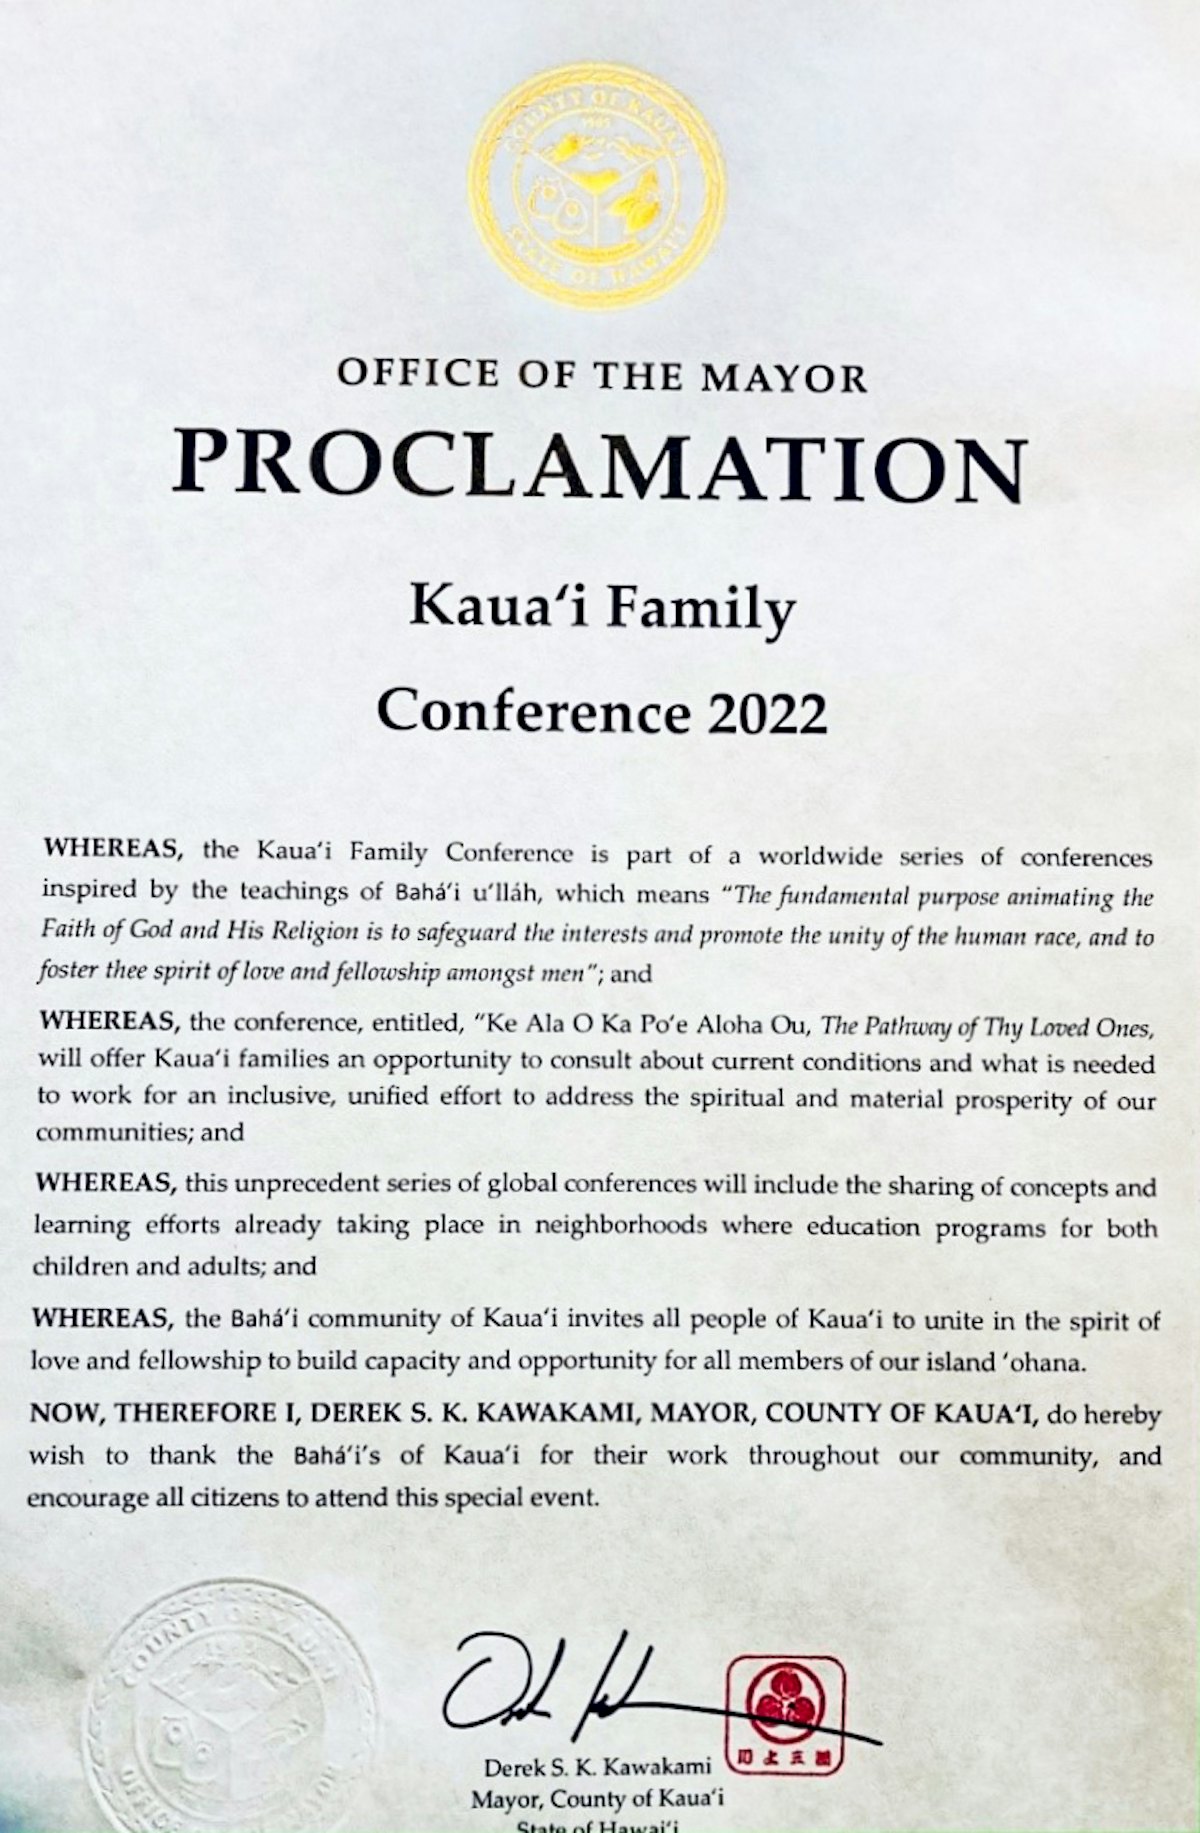 In the county of Kaua'i, Hawaii, mayor Derek Kawakami issued an official proclamation for the conference in that area. The document reads, in part, that the mayor wishes "to thank the Baha'is of Kaua'i for their hard work throughout our community, and encourage all citizens to attend this special event."